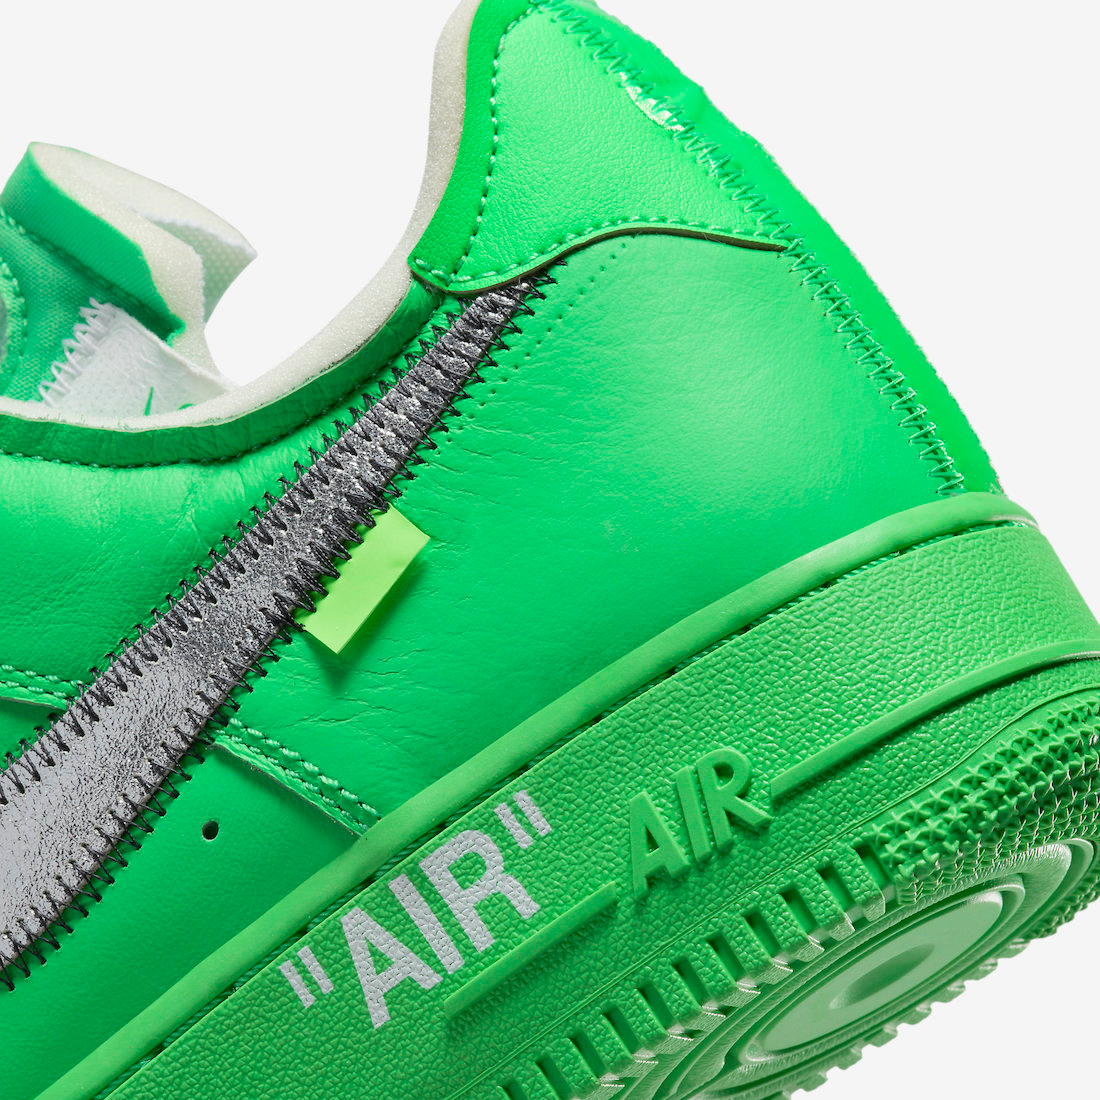 off-white-nike-air-force-1-brooklyn-light-green-spark-release-date-8